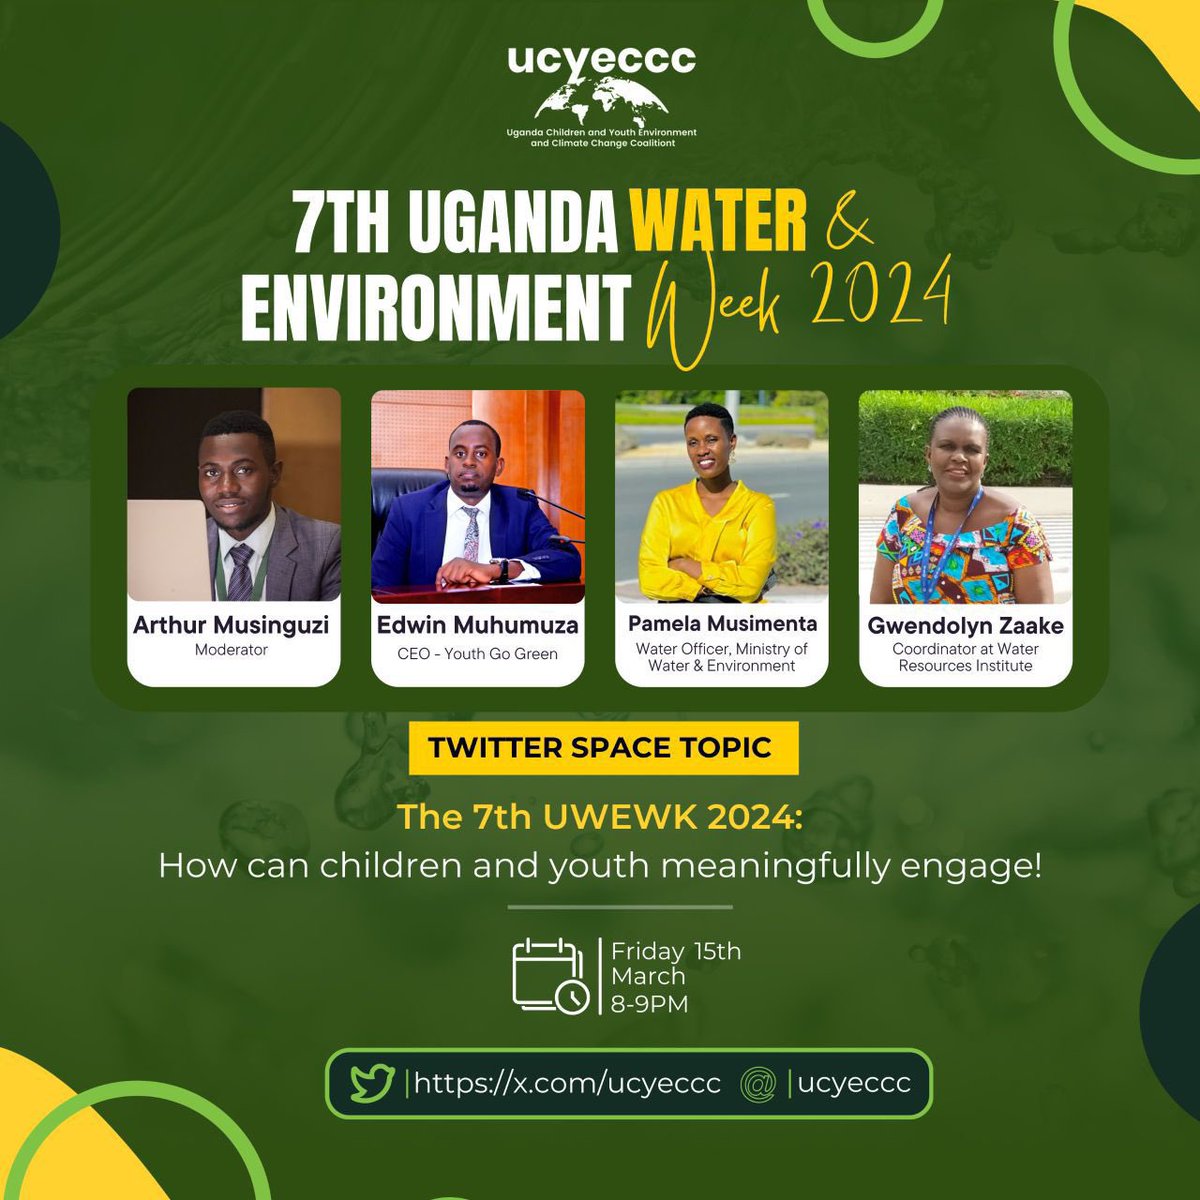 I'm excited to hear from @EdwinMuhumuzaB, the CEO @youthgogreen, @NkunsiPamela, a Water Engineer at @min_waterUg and @GKyoburungi from @WRIUga. As they share insights on what Uganda’s Water & Environment Week is all about in today's Twitter space from 8:00-9:00 PM. #UWEWK2024